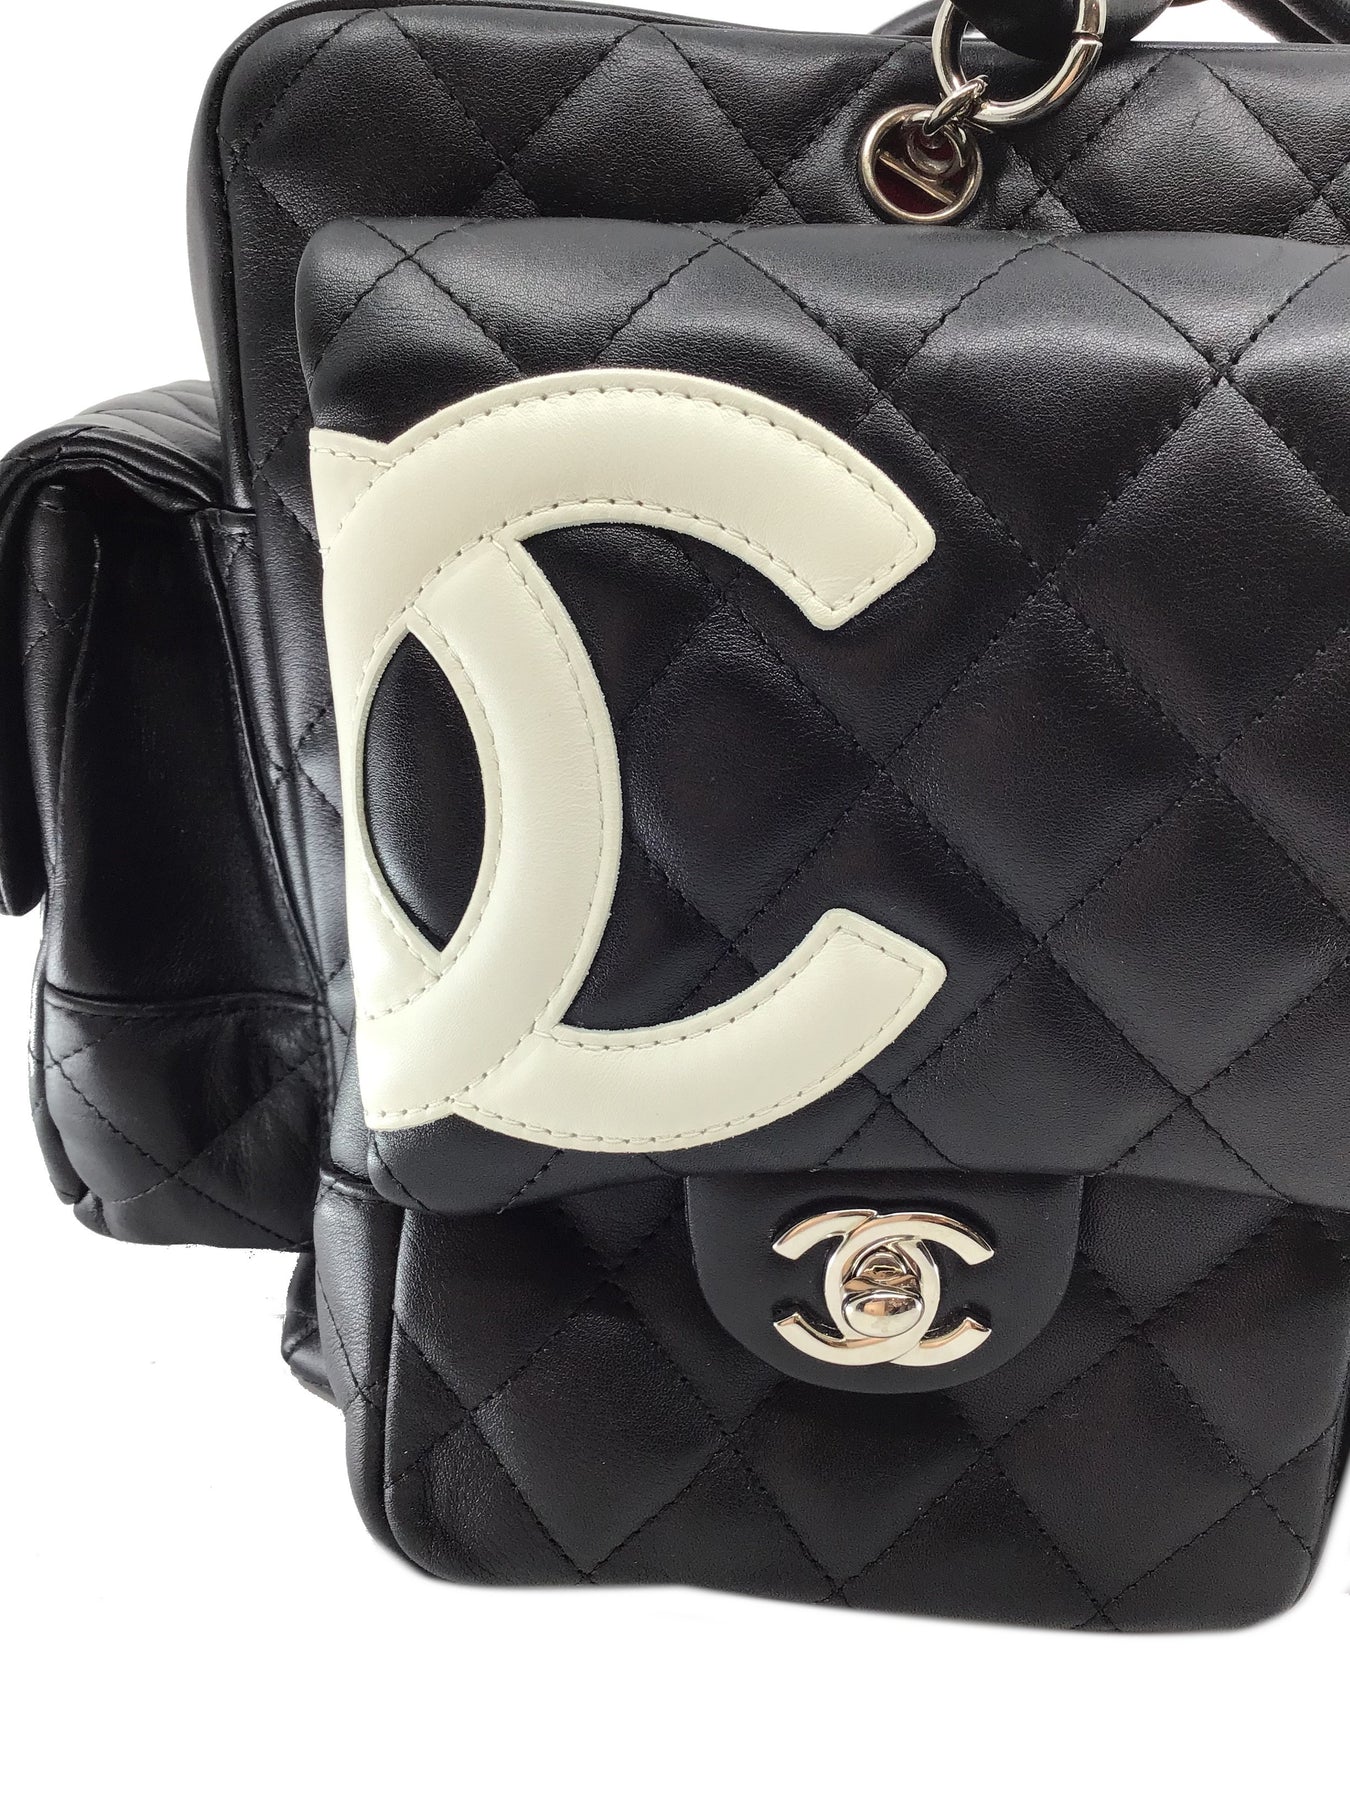 Chanel Beige/Black Quilted Leather Ligne Cambon Reporter Bag